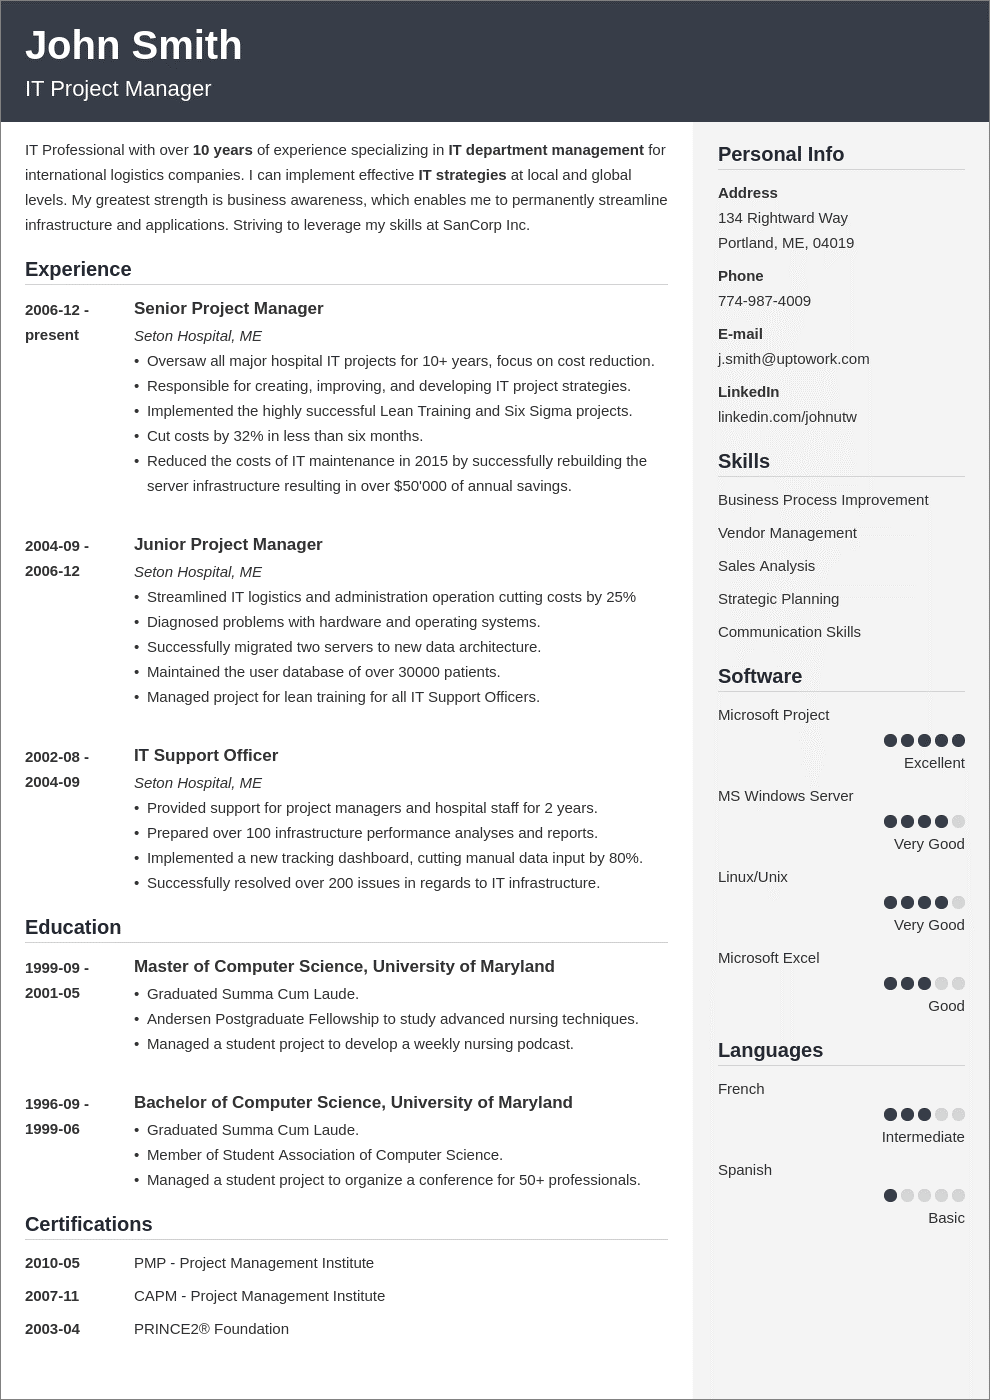 one-page resume style